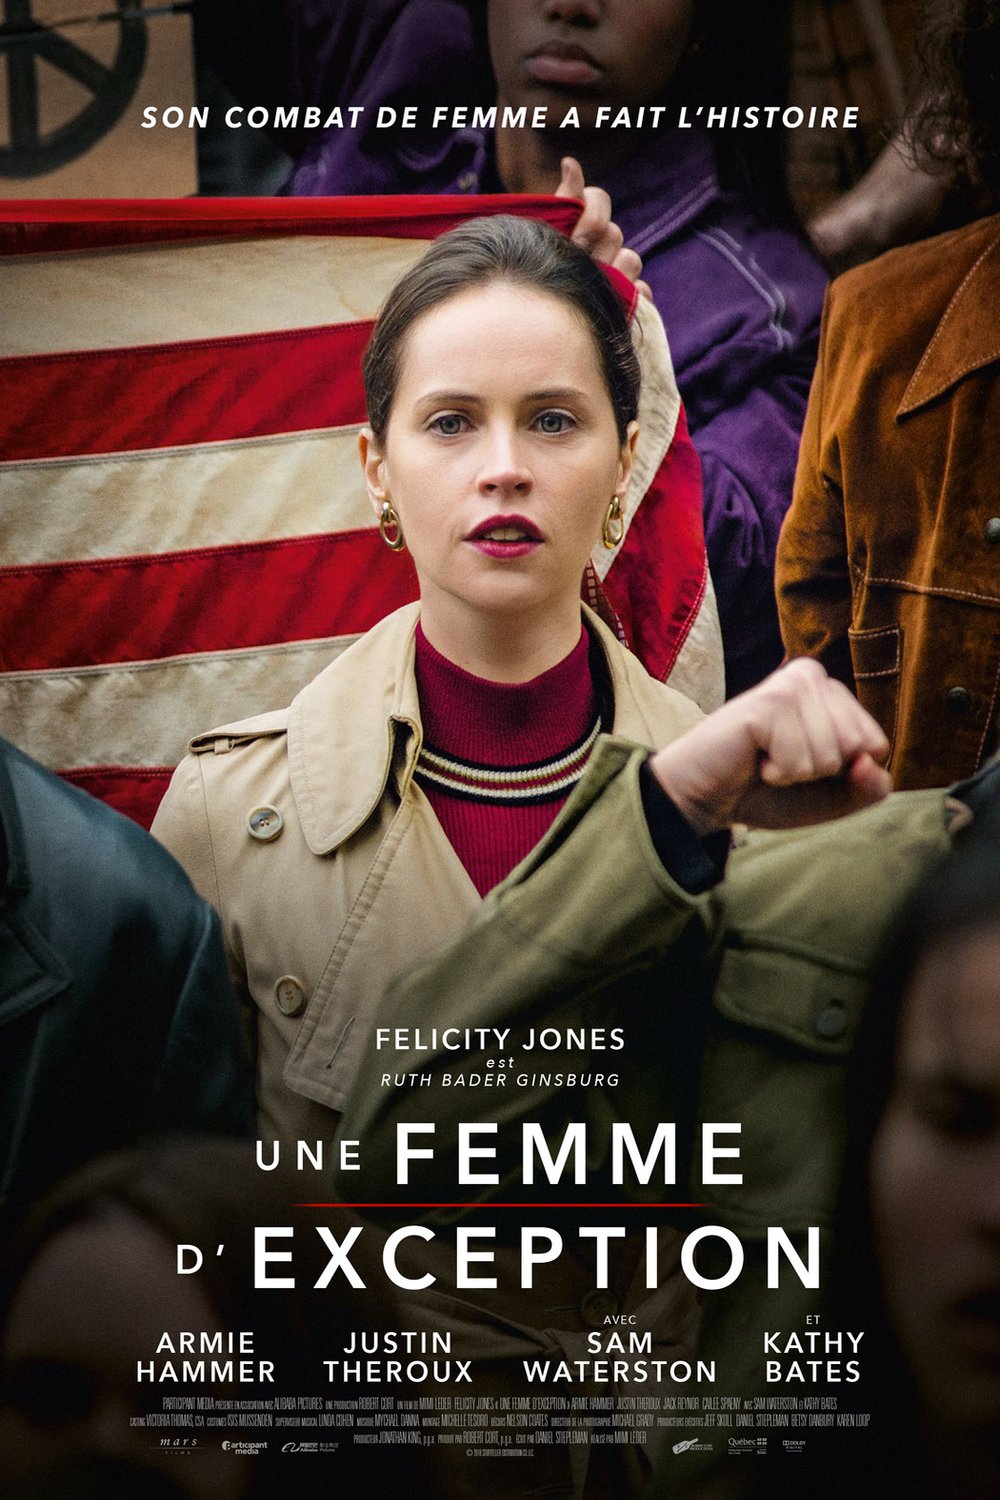 Poster of the movie Une femme d'exception